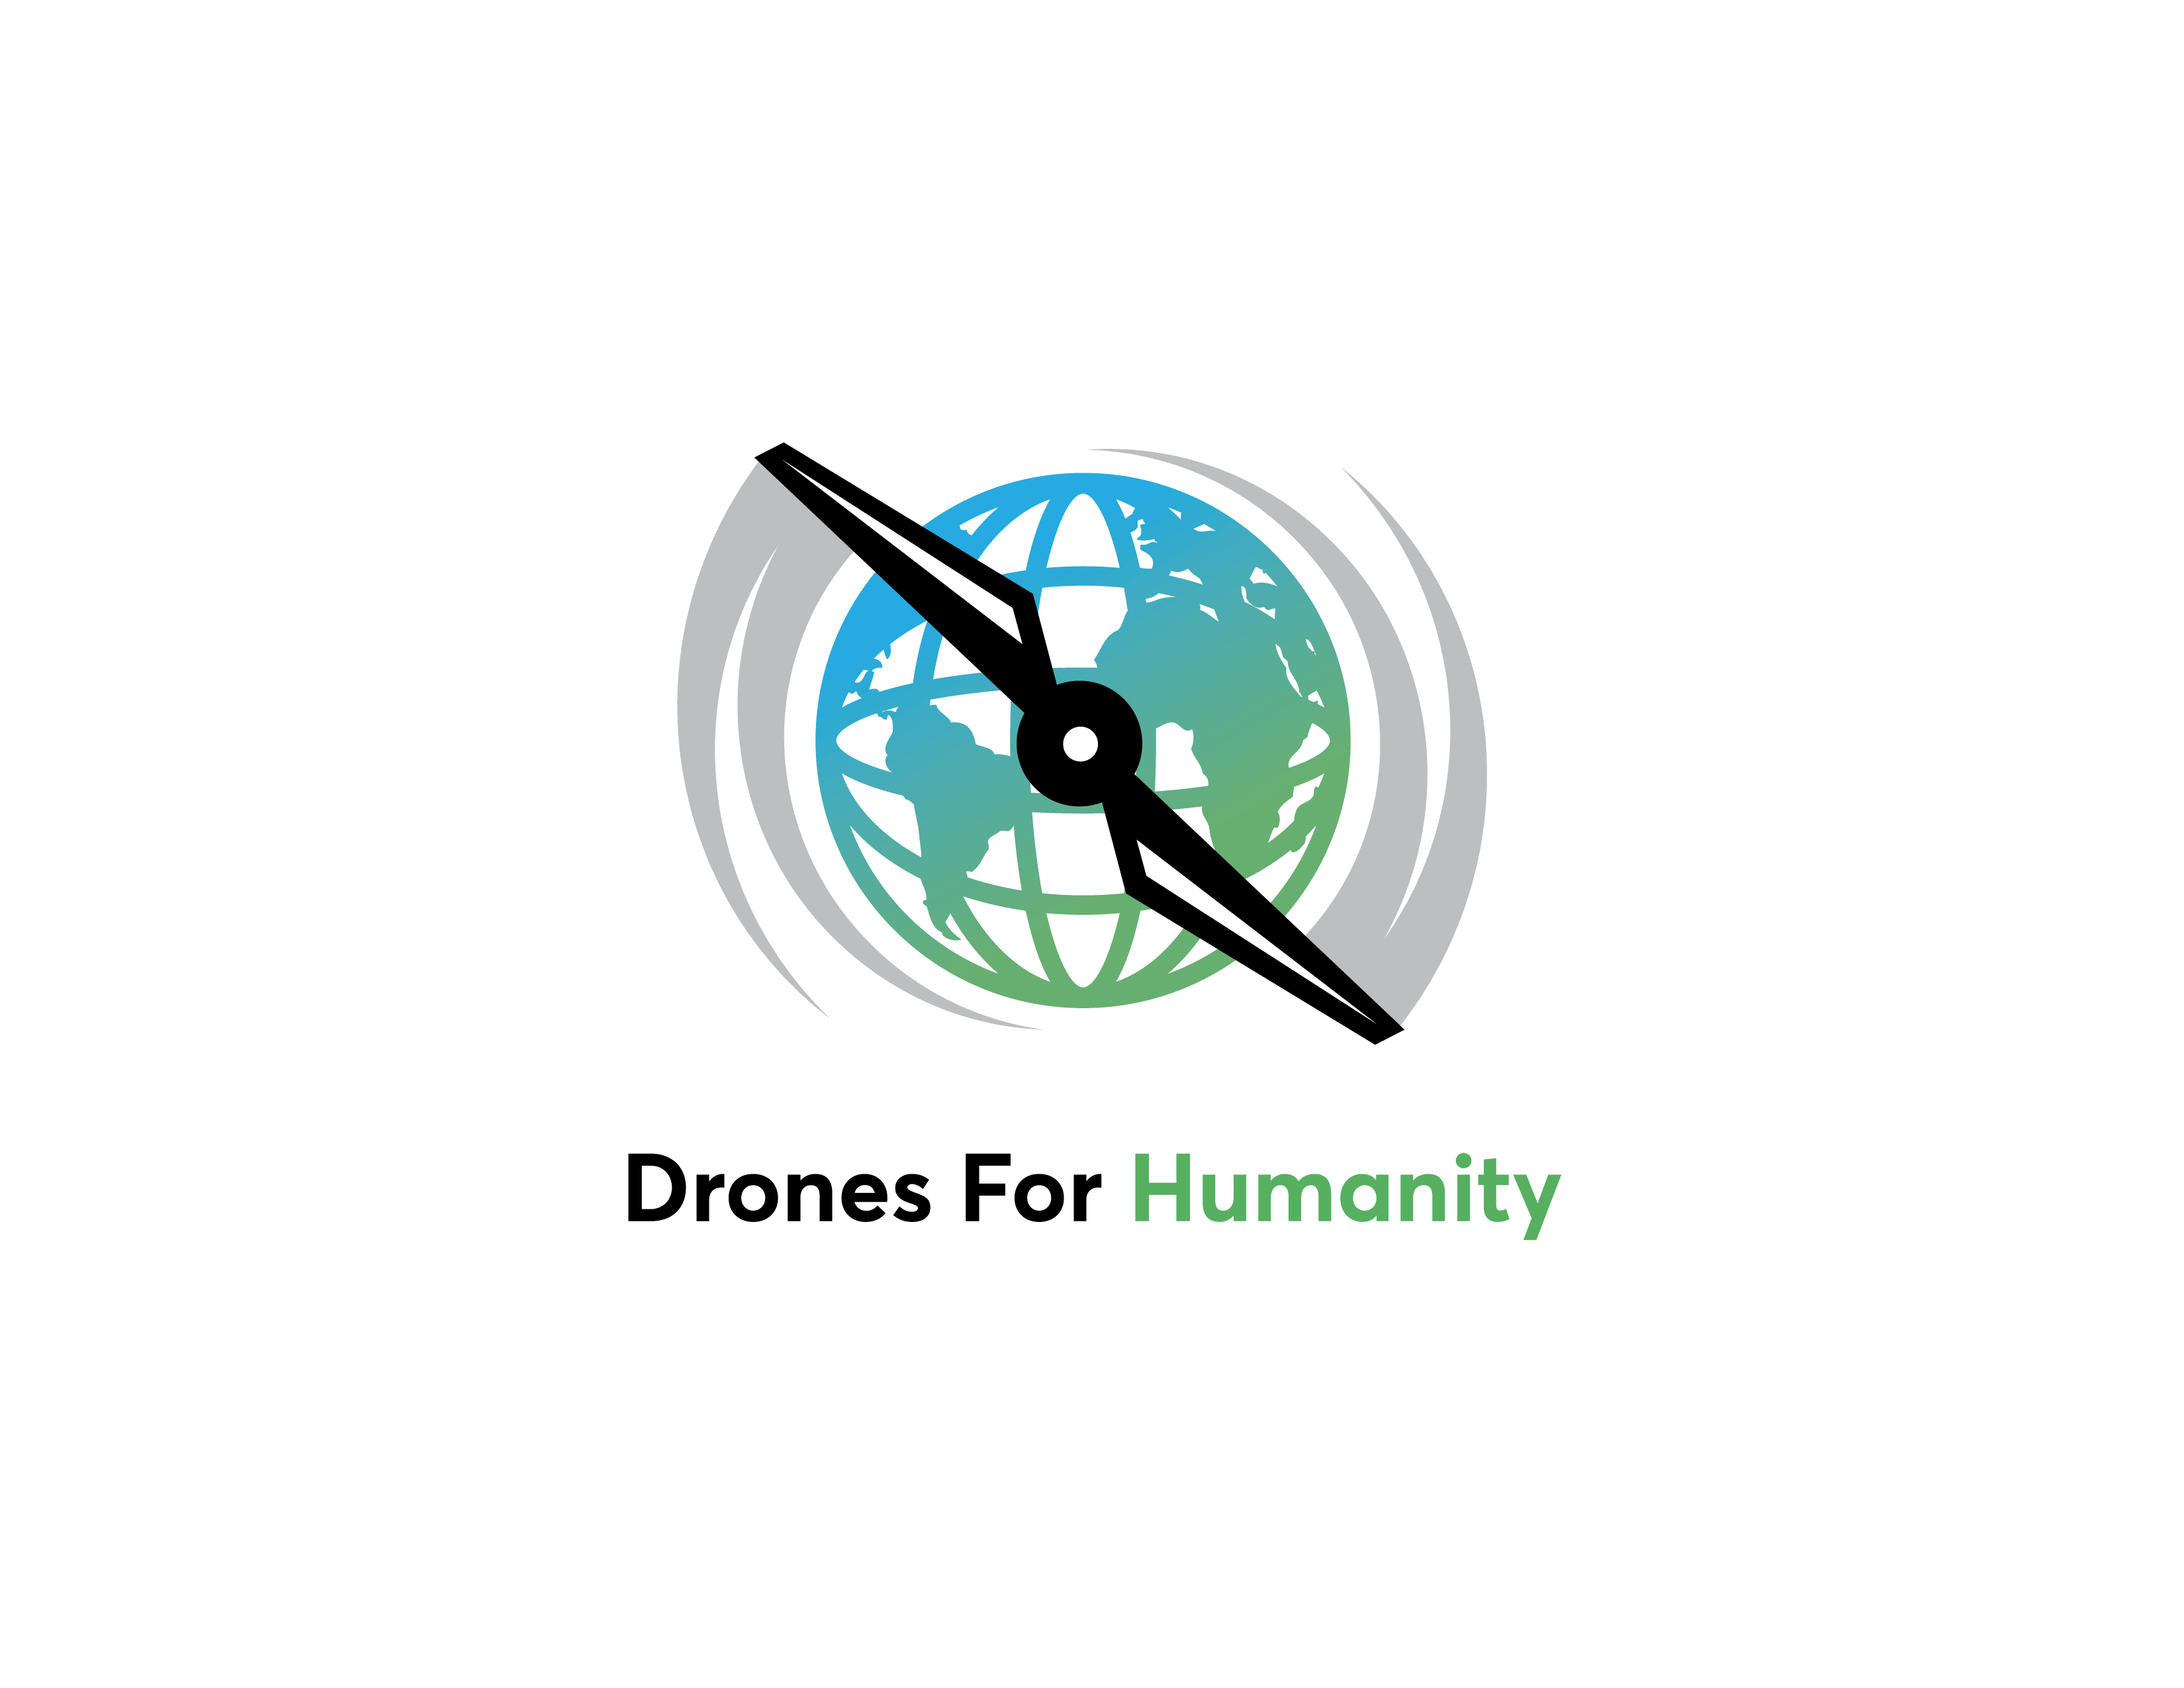 Drones for Humanity